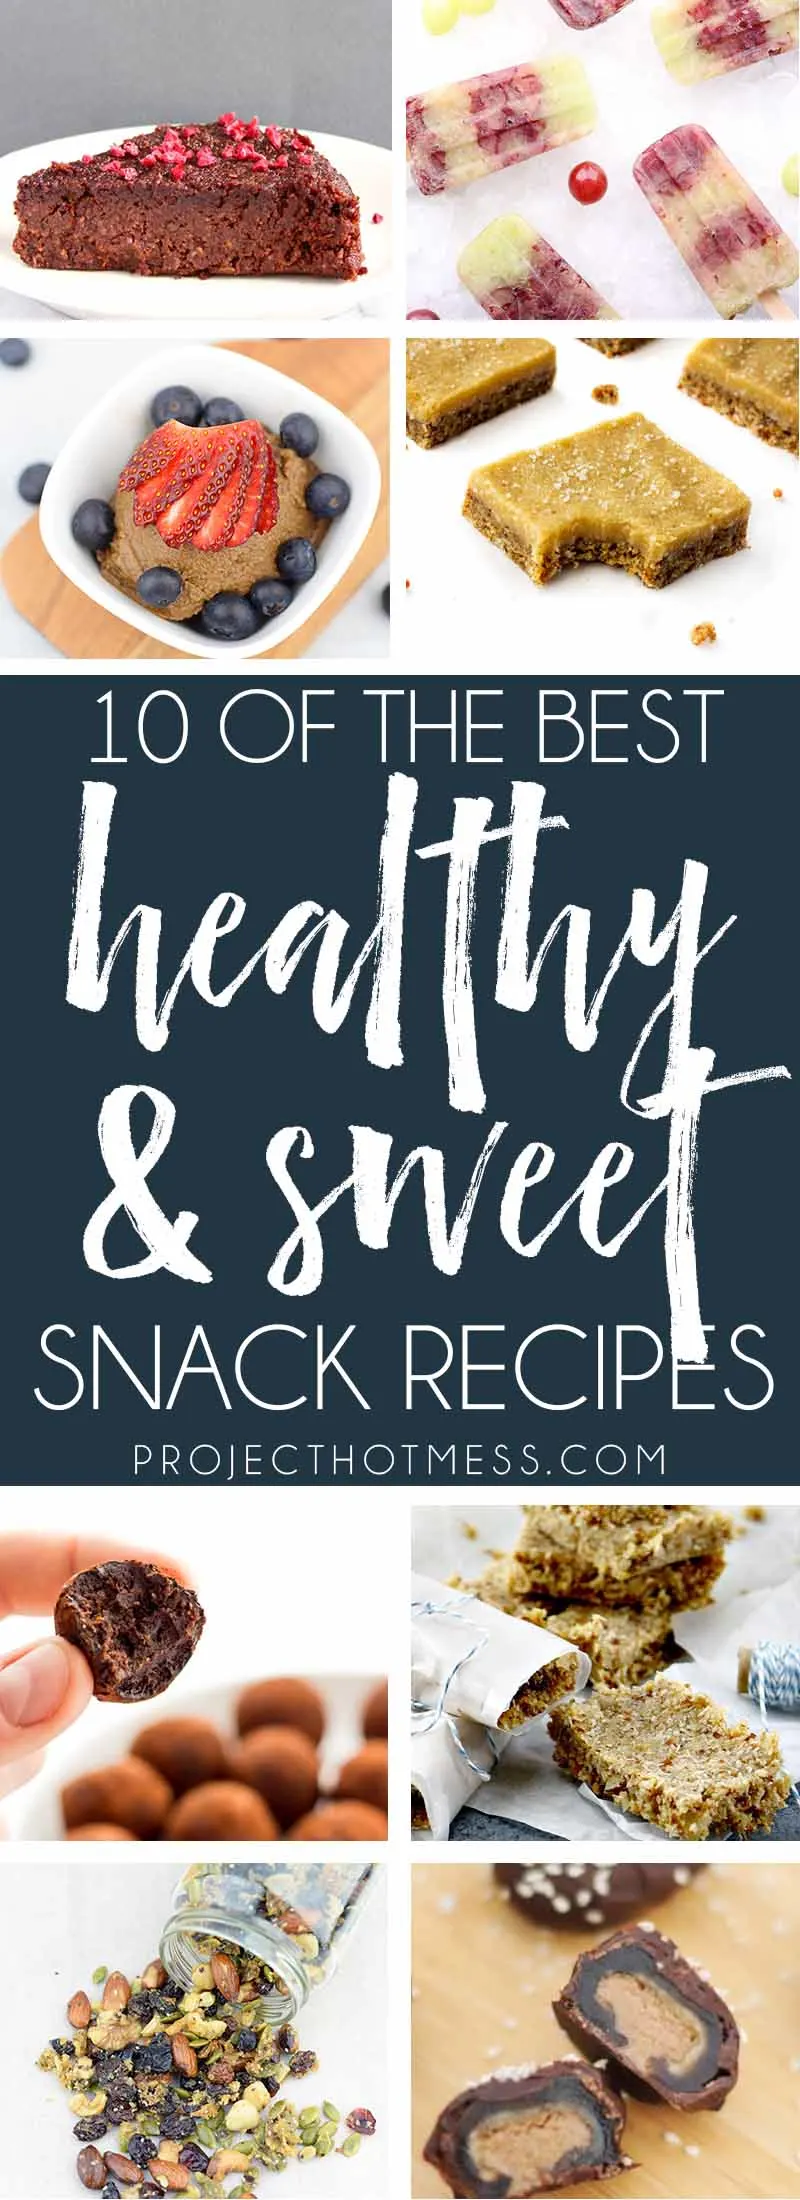 An amazing round up of 11 of the best healthy sweet snack recipes you can have any time, guilt free, full of flavour, and great for those with intolerances. Healthy Snacks | Chocolate | Chocolate Recipe | Chocolate Dessert | Chocolate Treat | Raw Dessert | Paleo Dessert | Healthy Dessert | Vegan Dessert | Vegan Recipe | Keto Recipe | LCHF | Sweet Snacks | Paleo Snacks | Snack Recipes